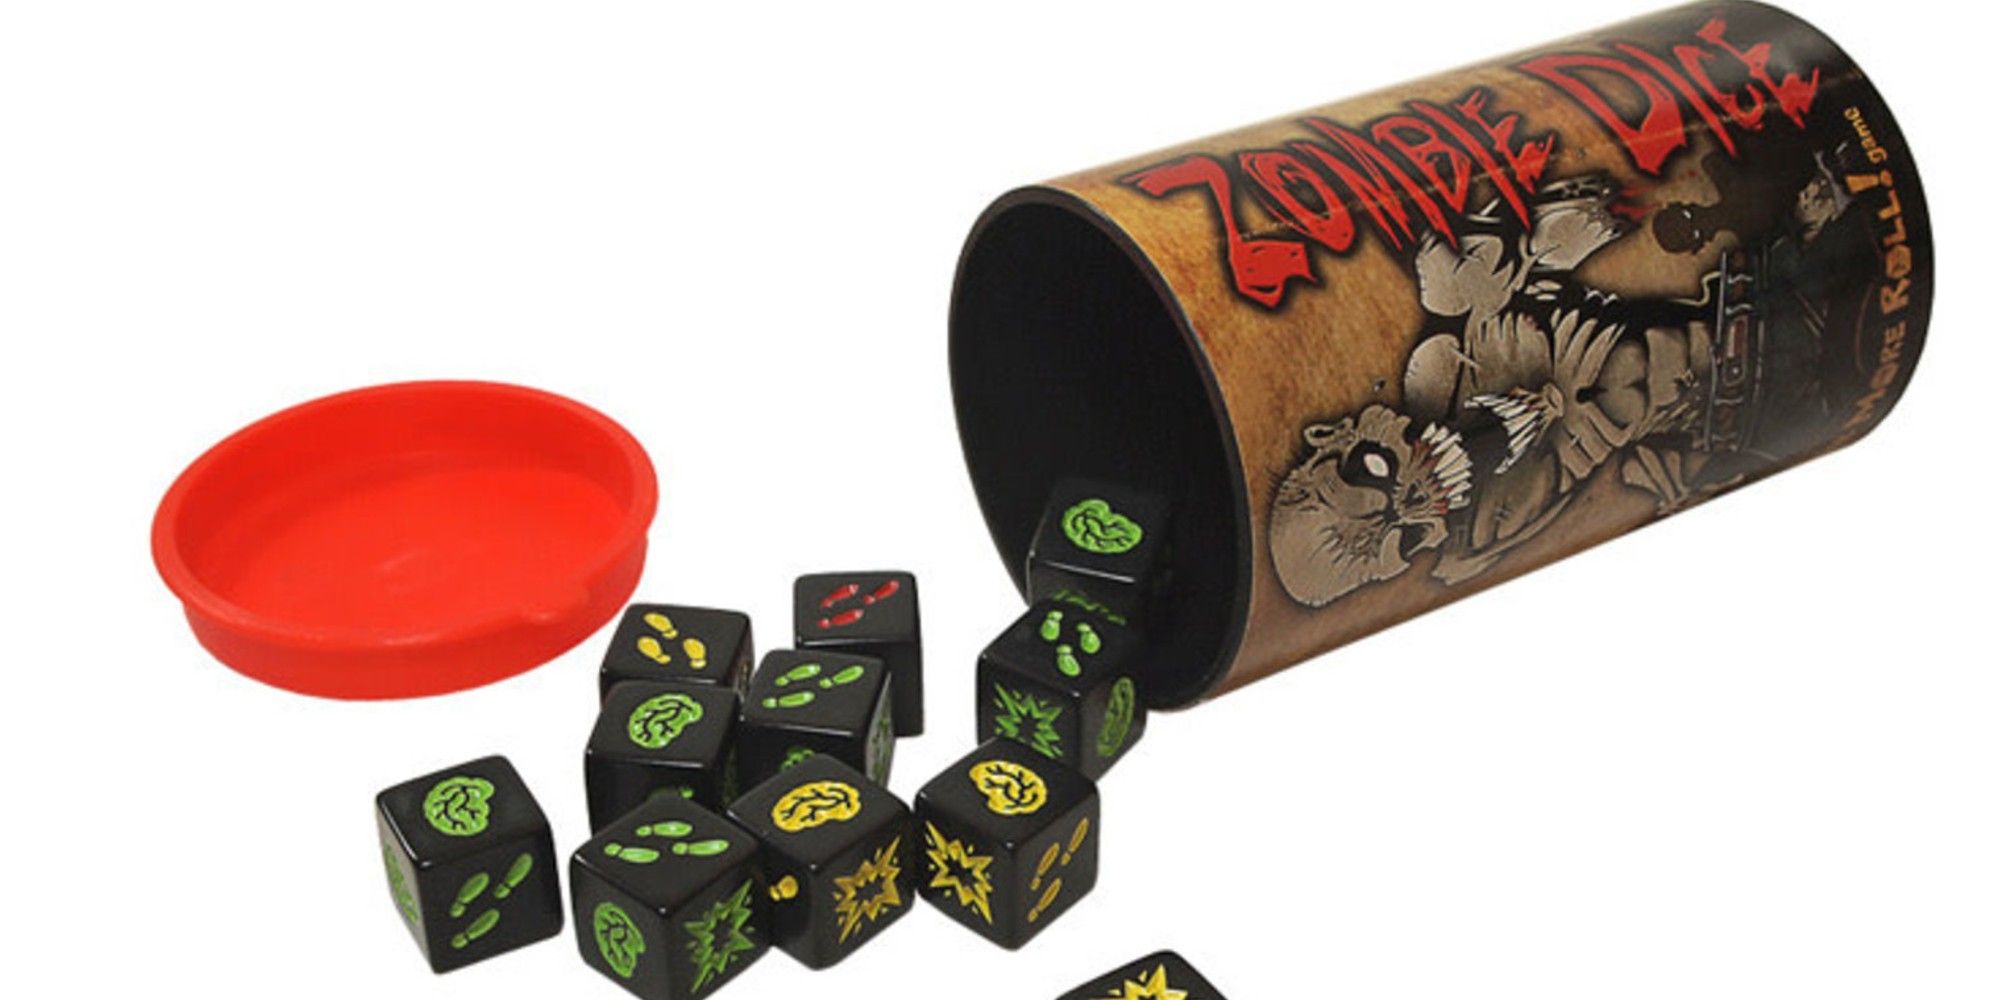 Zombie Dice Rolling Across The Table